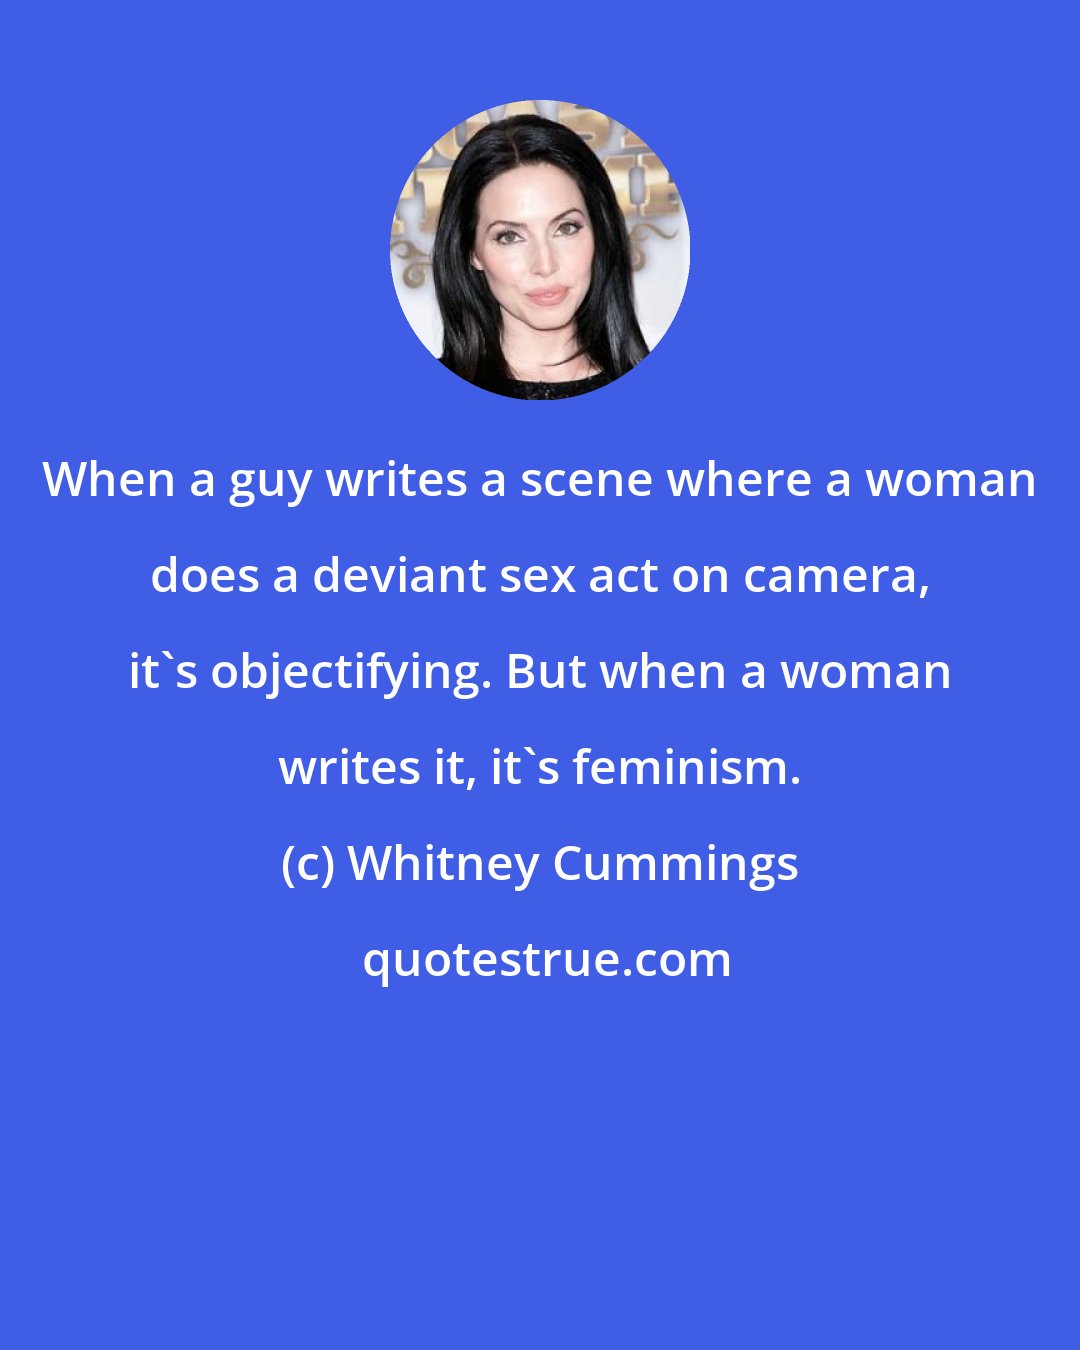 Whitney Cummings: When a guy writes a scene where a woman does a deviant sex act on camera, it's objectifying. But when a woman writes it, it's feminism.